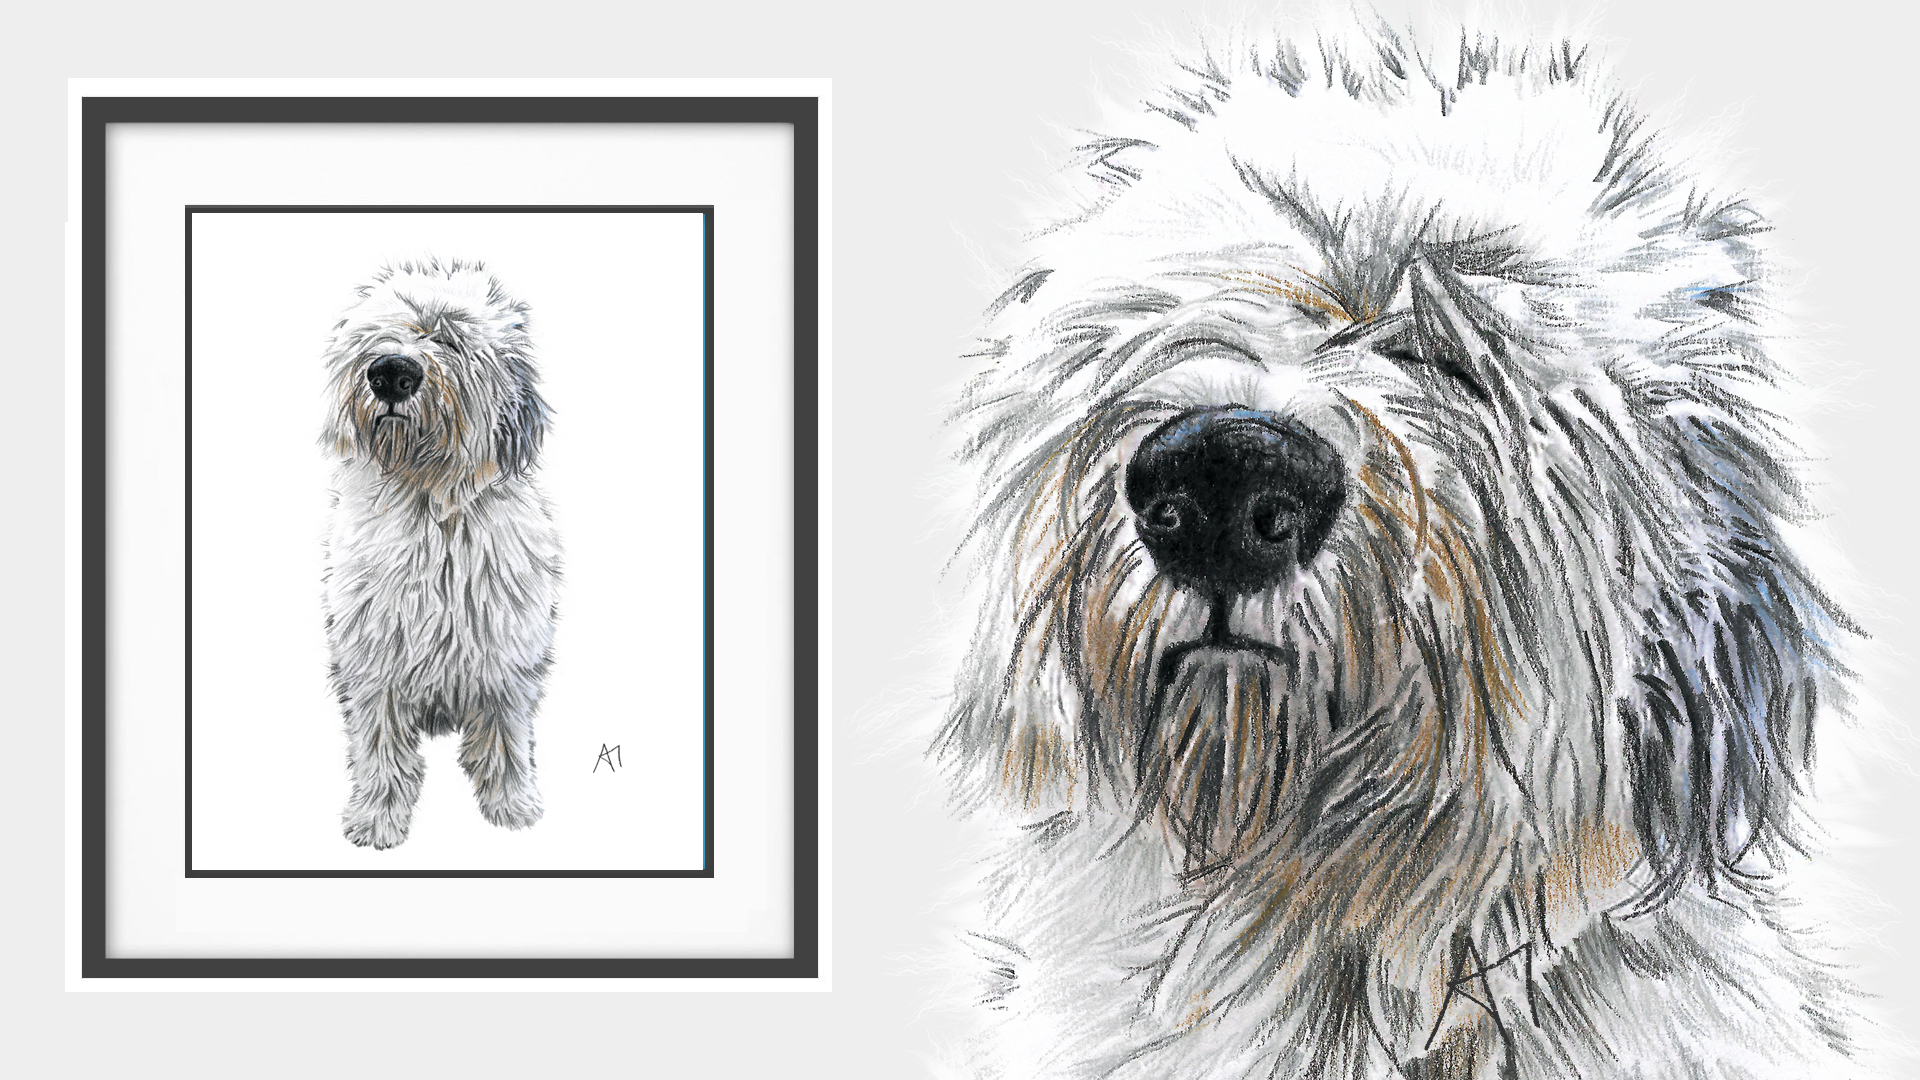 Shambles the Old English Sheepdog from Co. Down, Northern Ireland